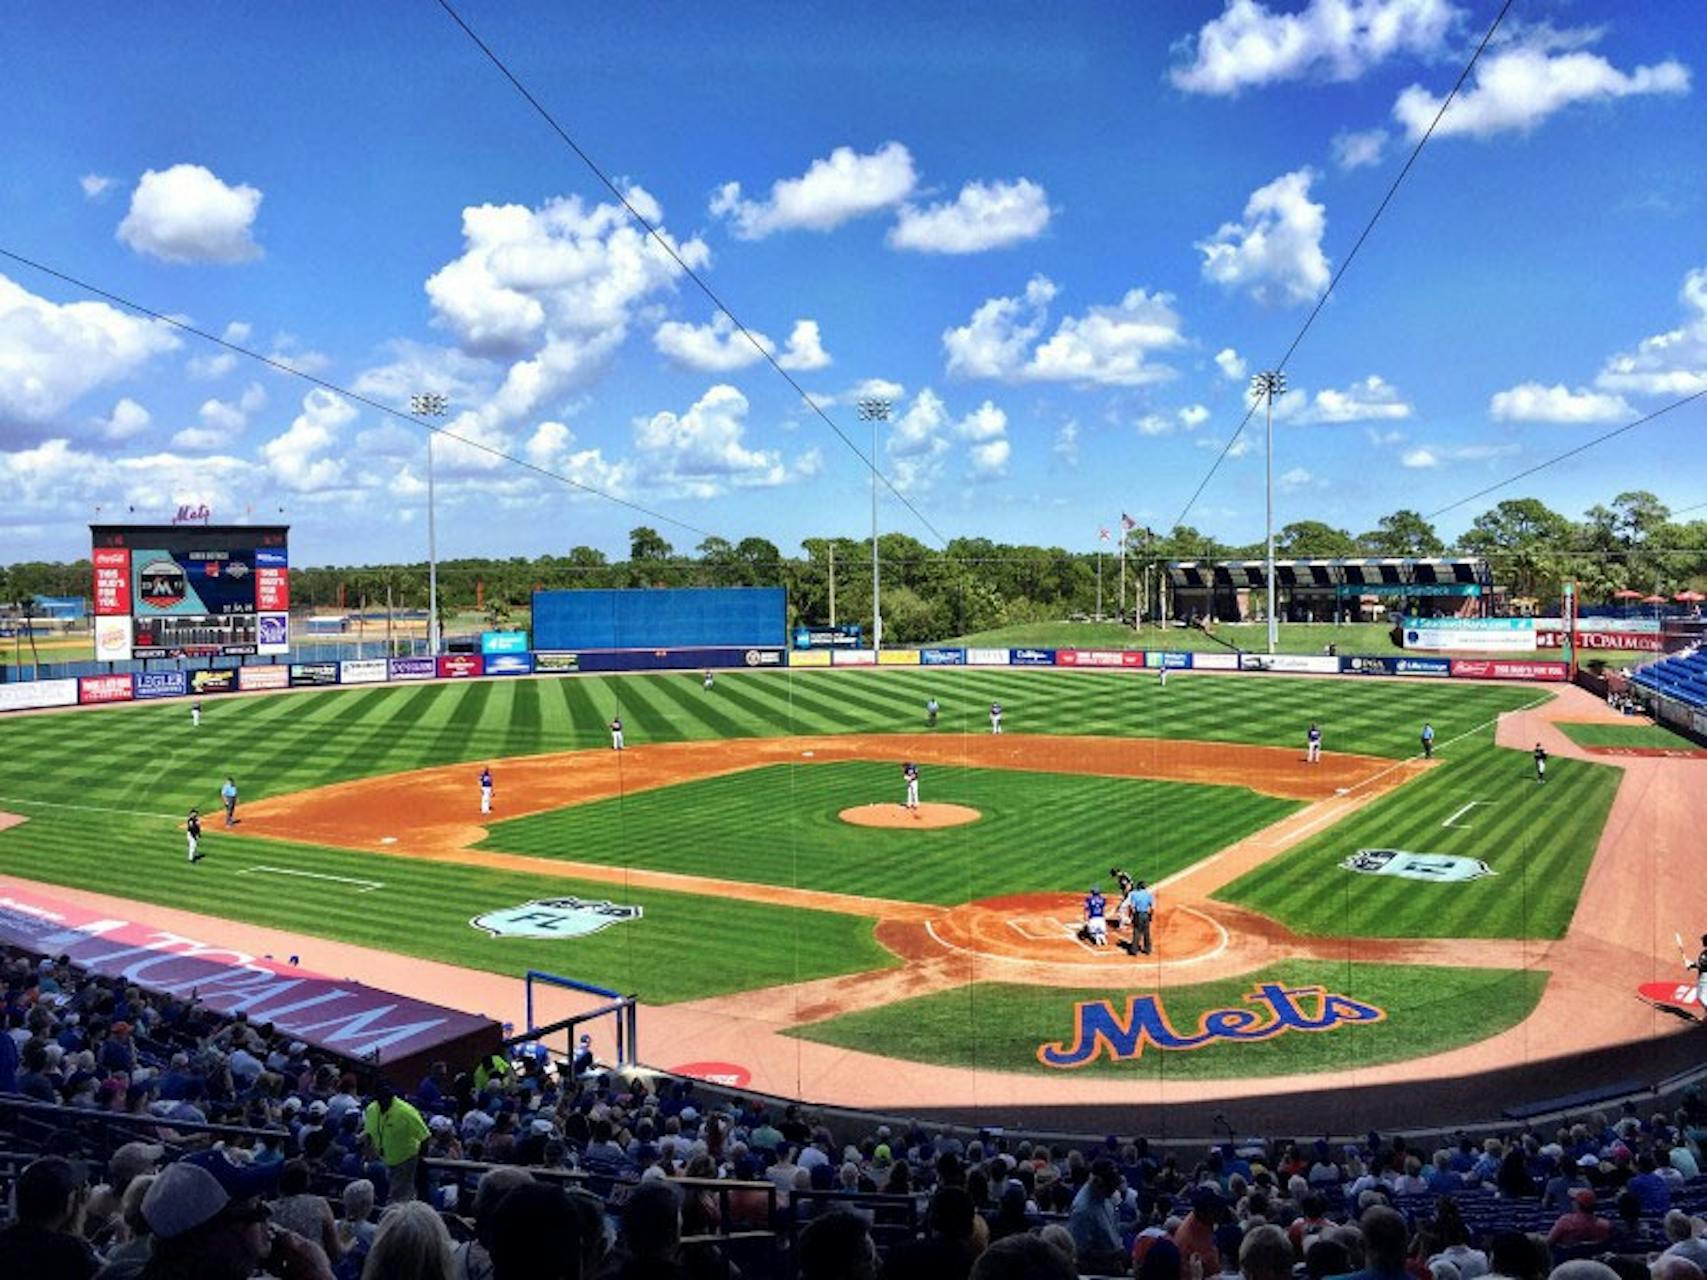 Mets spring training in Port St. Lucie, Florida